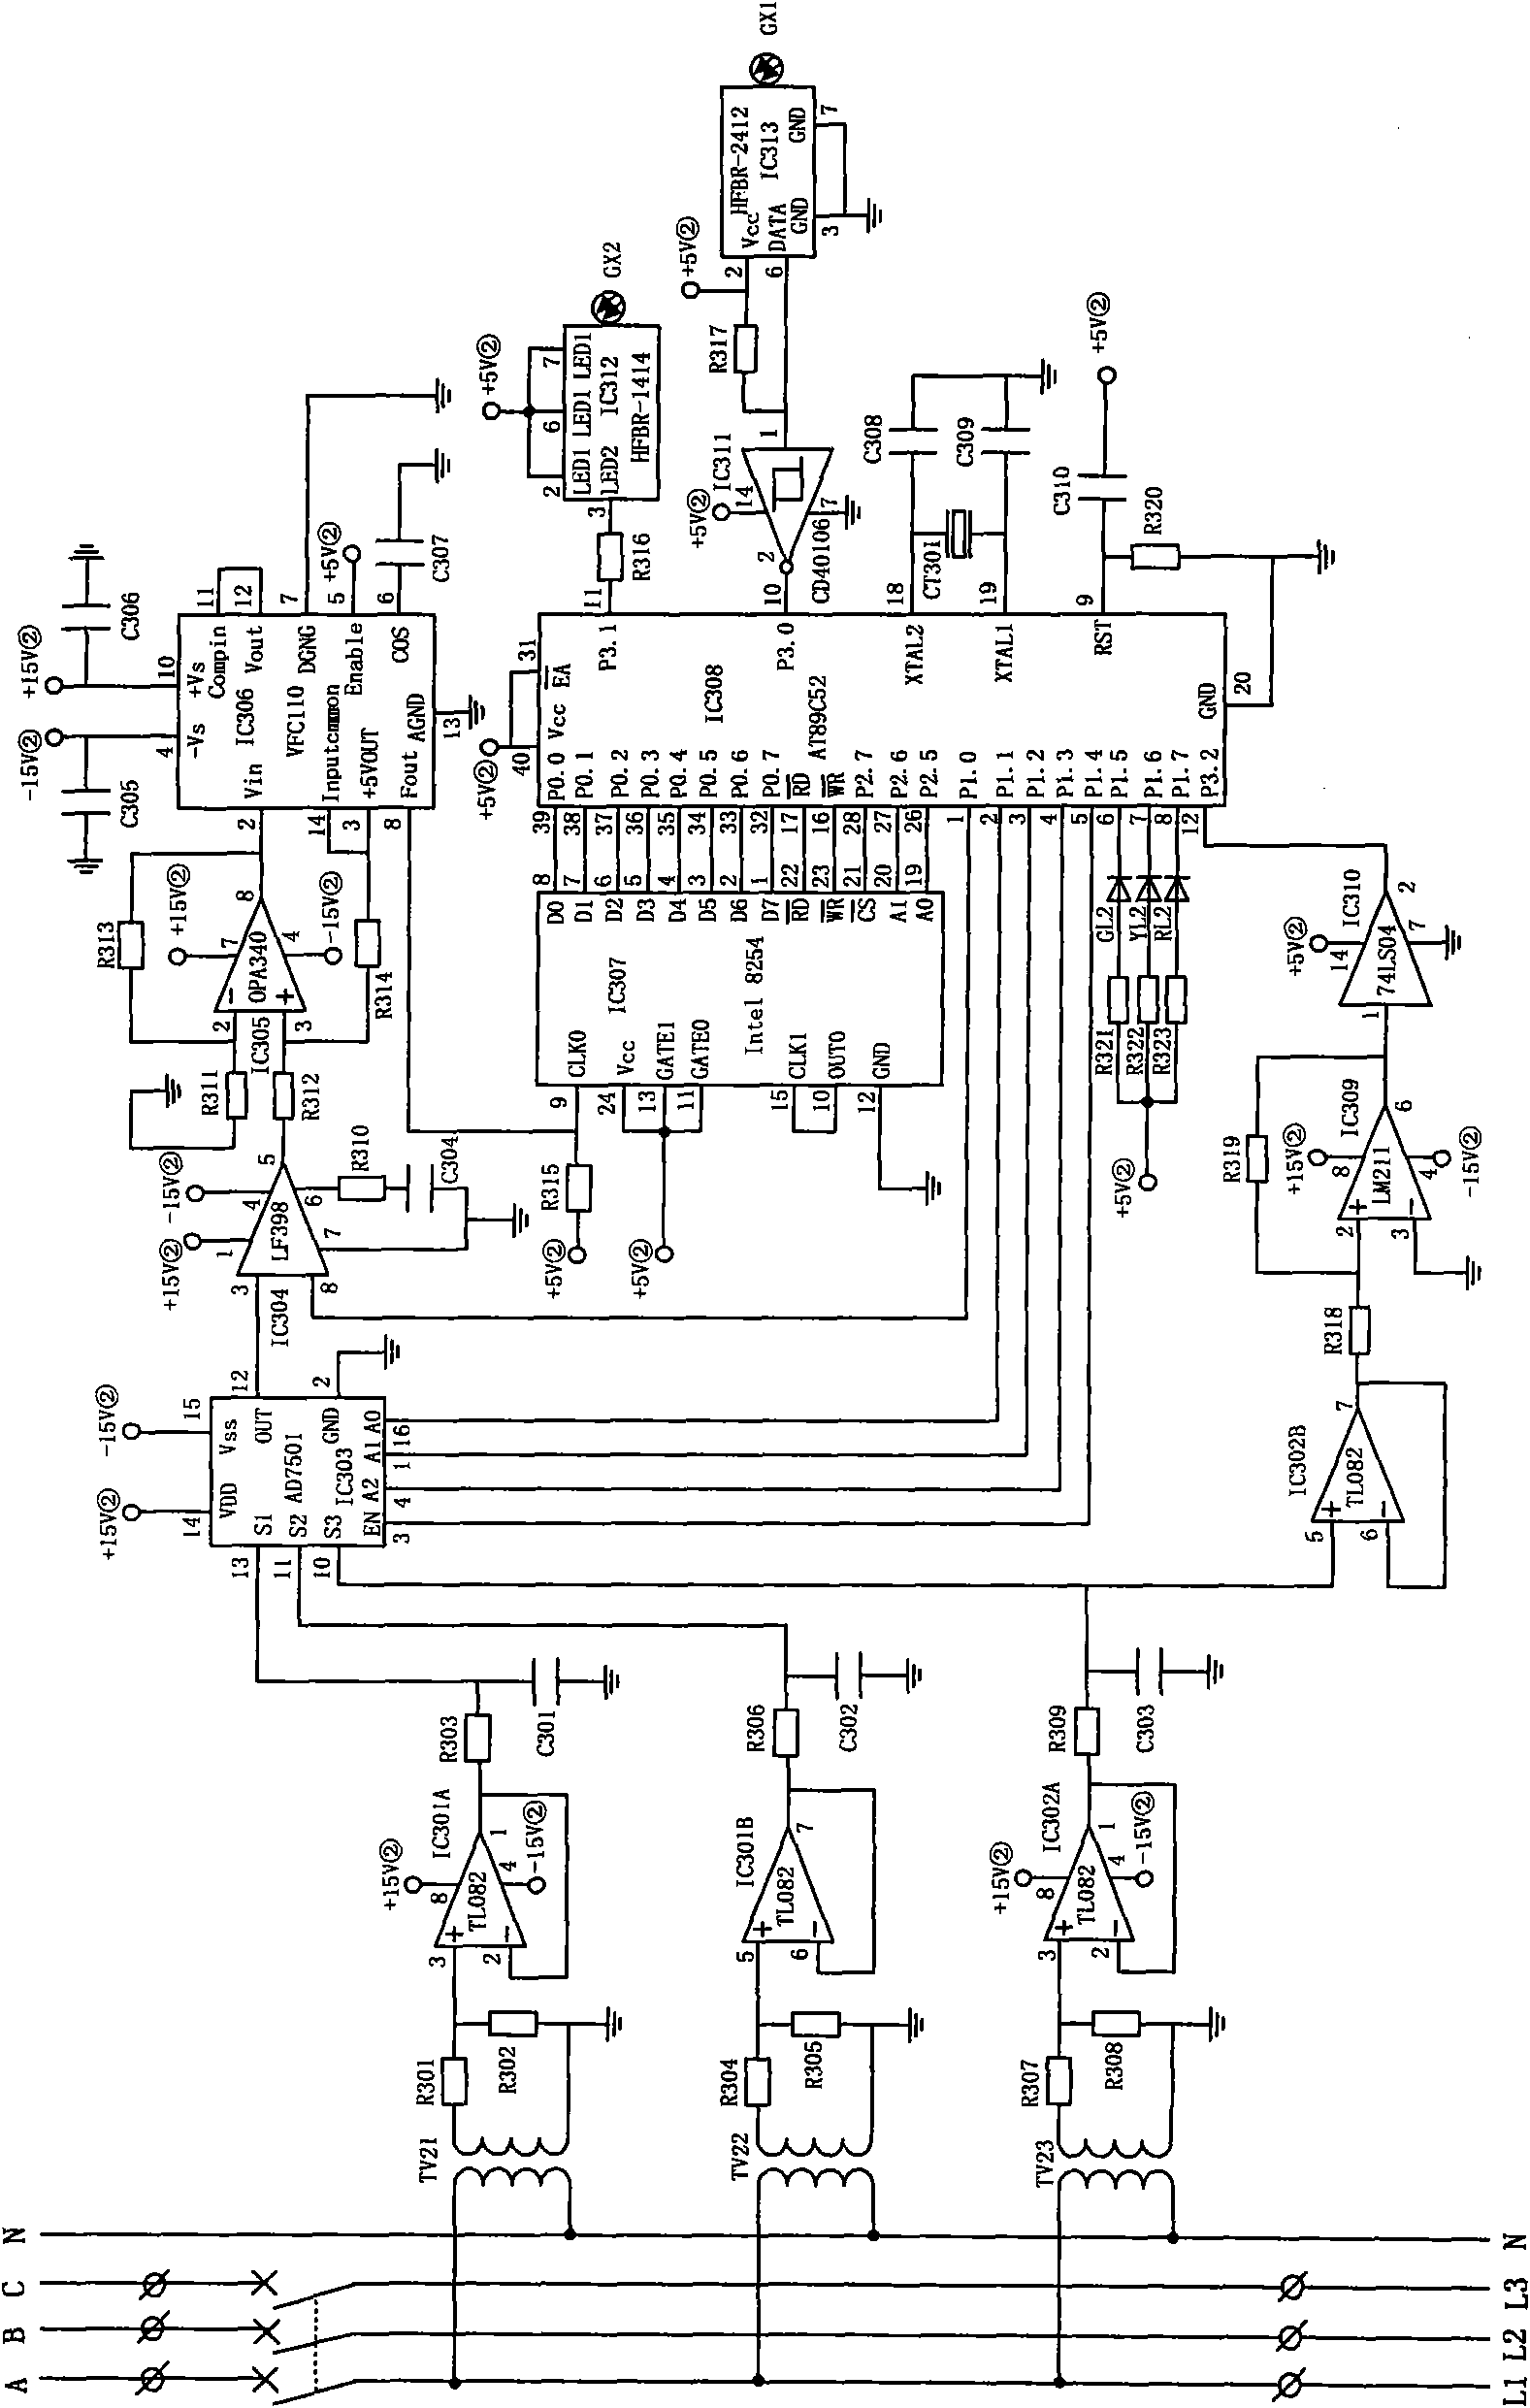 Main-contact electrical-contact state on-line detector for low-voltage circuit breaker